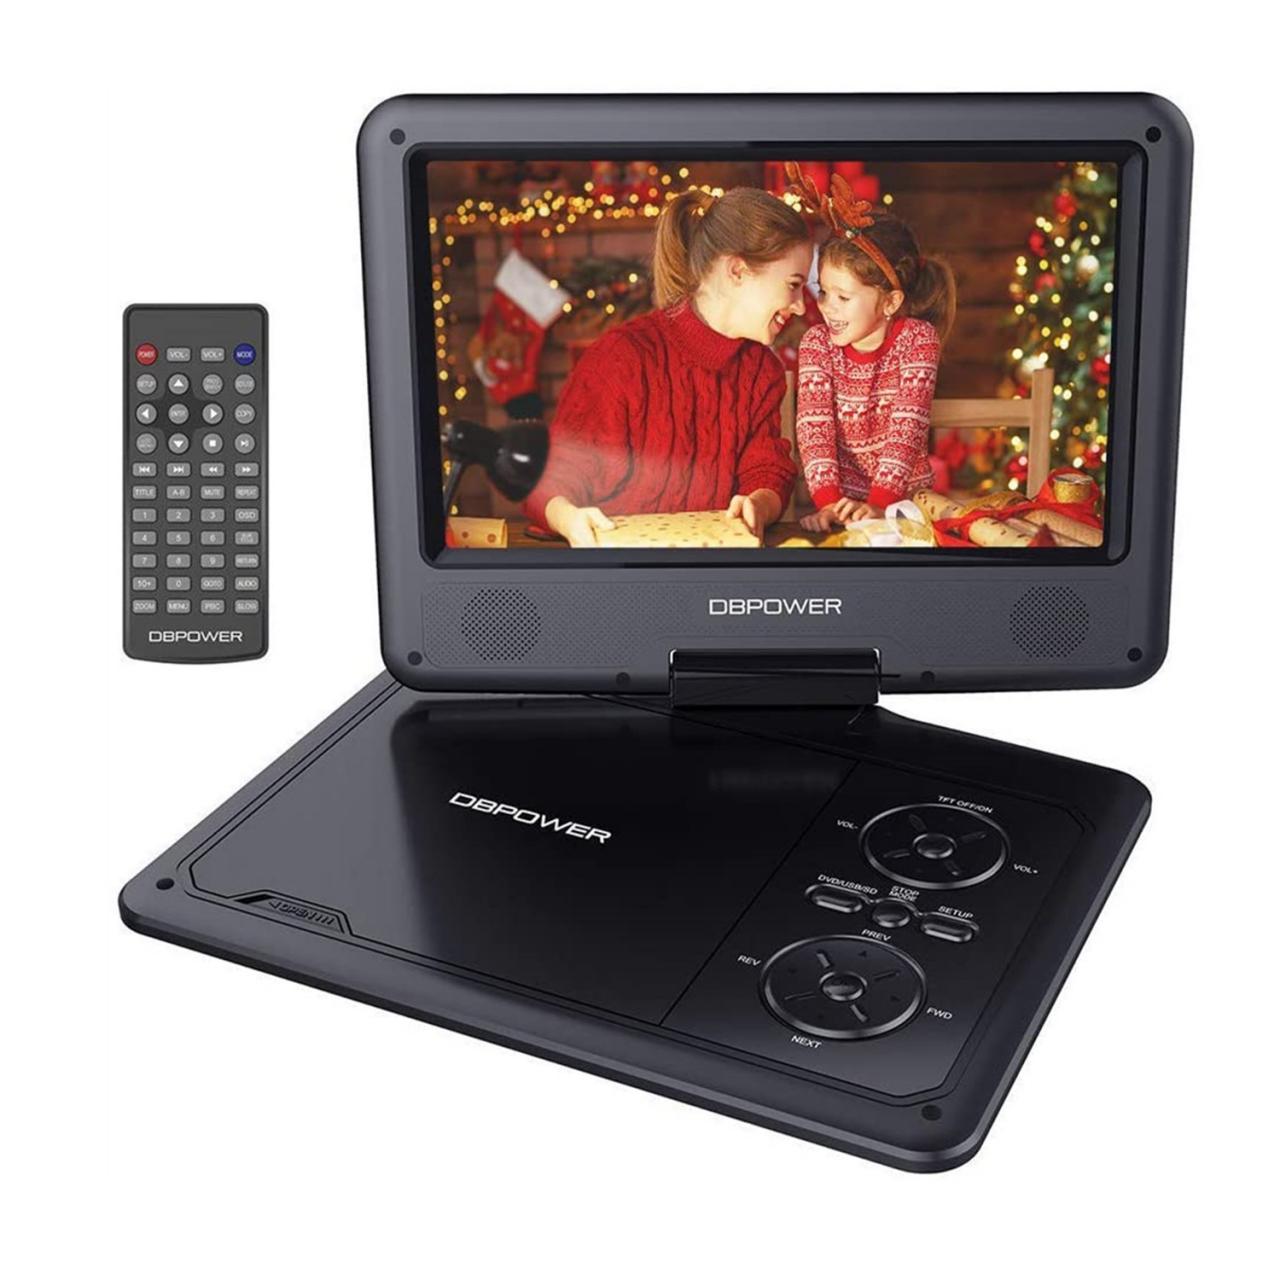 DBPOWER 12in Portable DVD Player